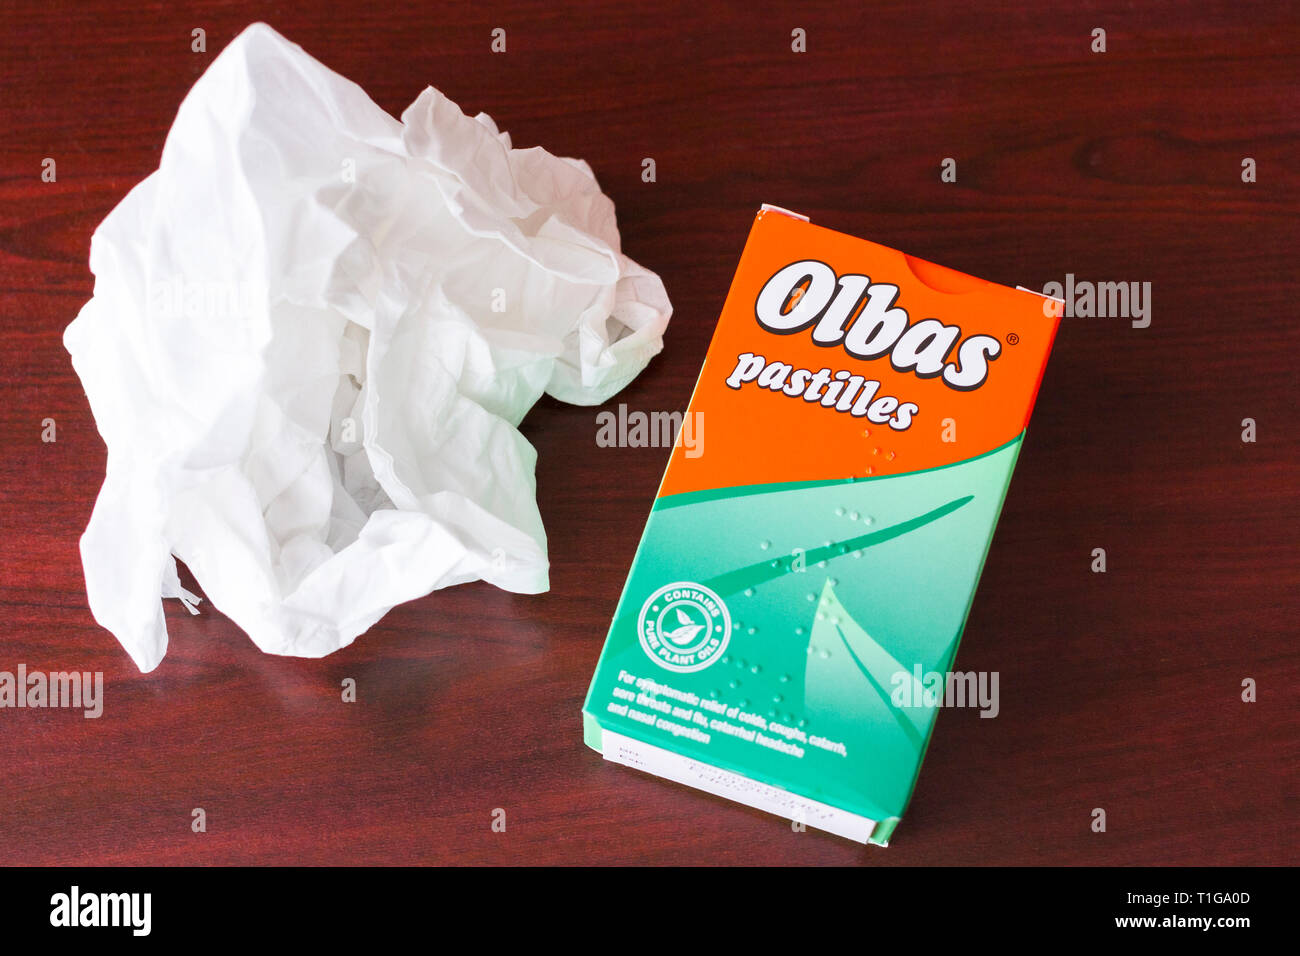 Box of Olbas pastilles for sore throats, coughs, colds and nasal congestion. with a used tissue. United Kingdom Stock Photo